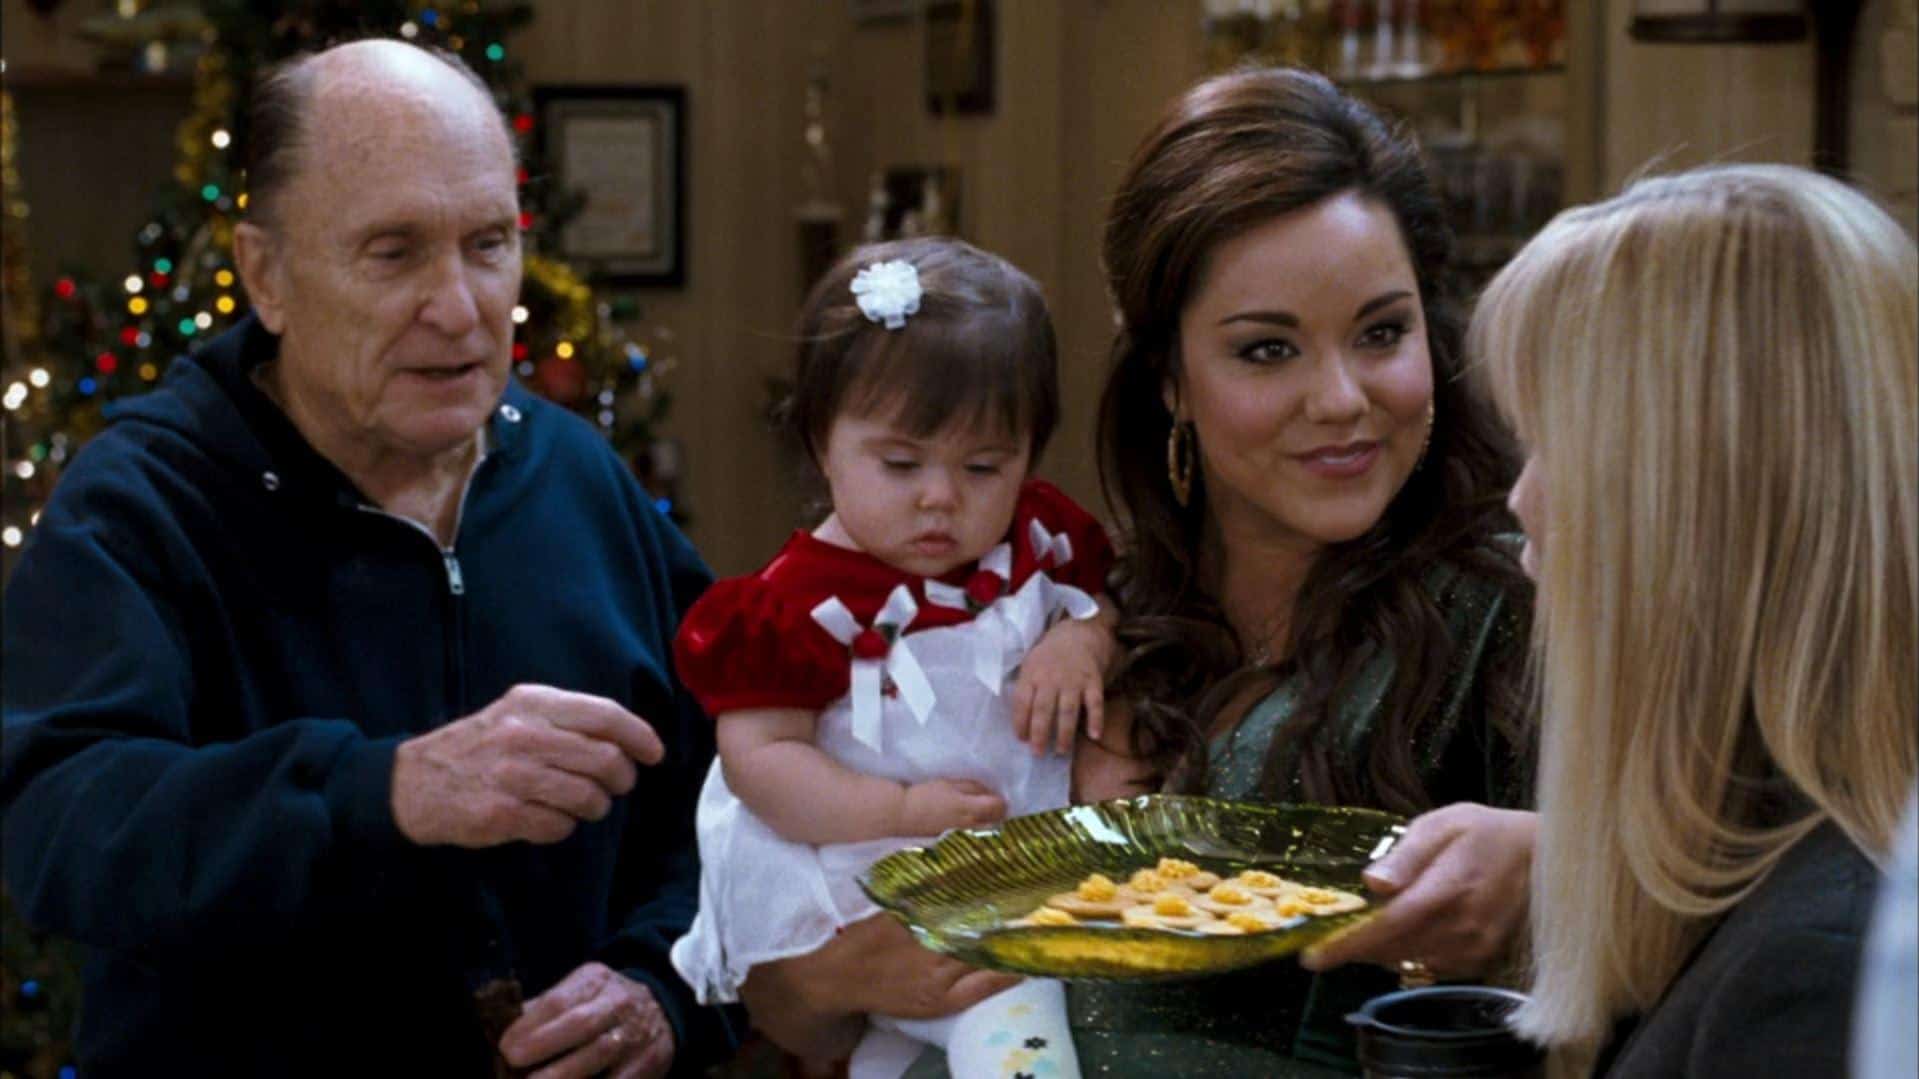 Four Christmases (2008) | Robert Duvall and Katy Mixon Greer in Four Christmases (2008)